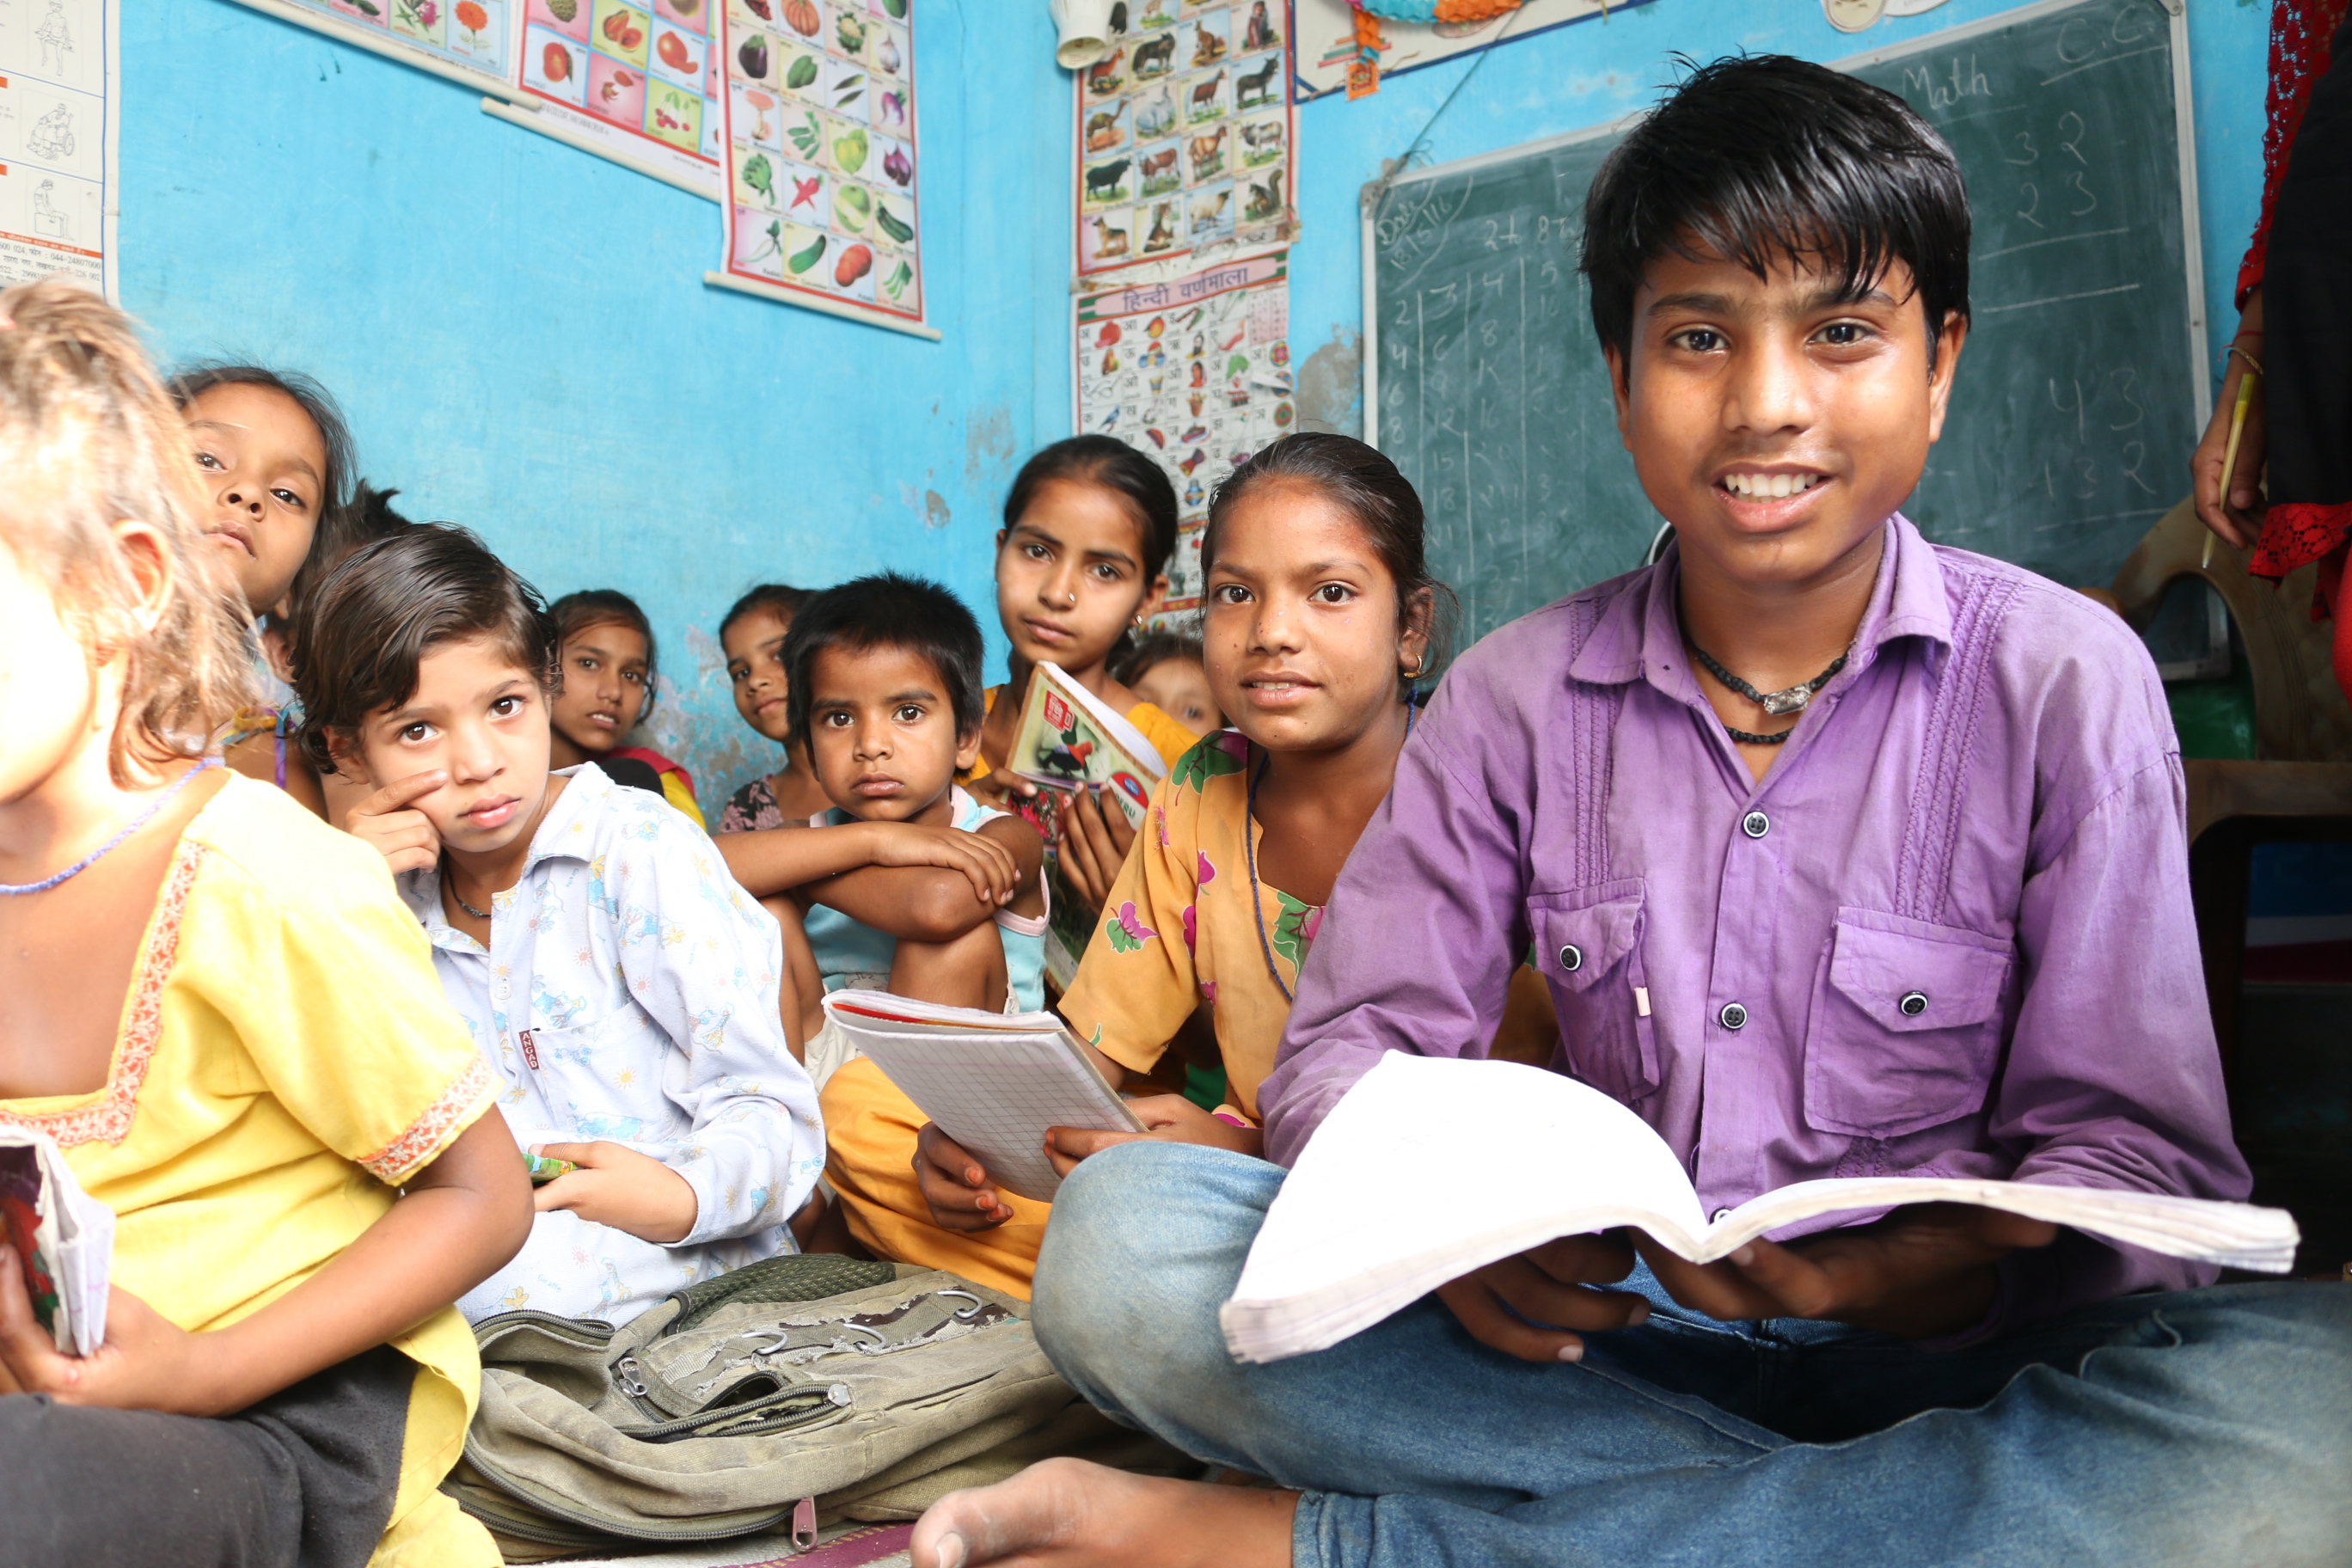 Mohsin, a former child laborer in India, attended a World Vision informal education center.